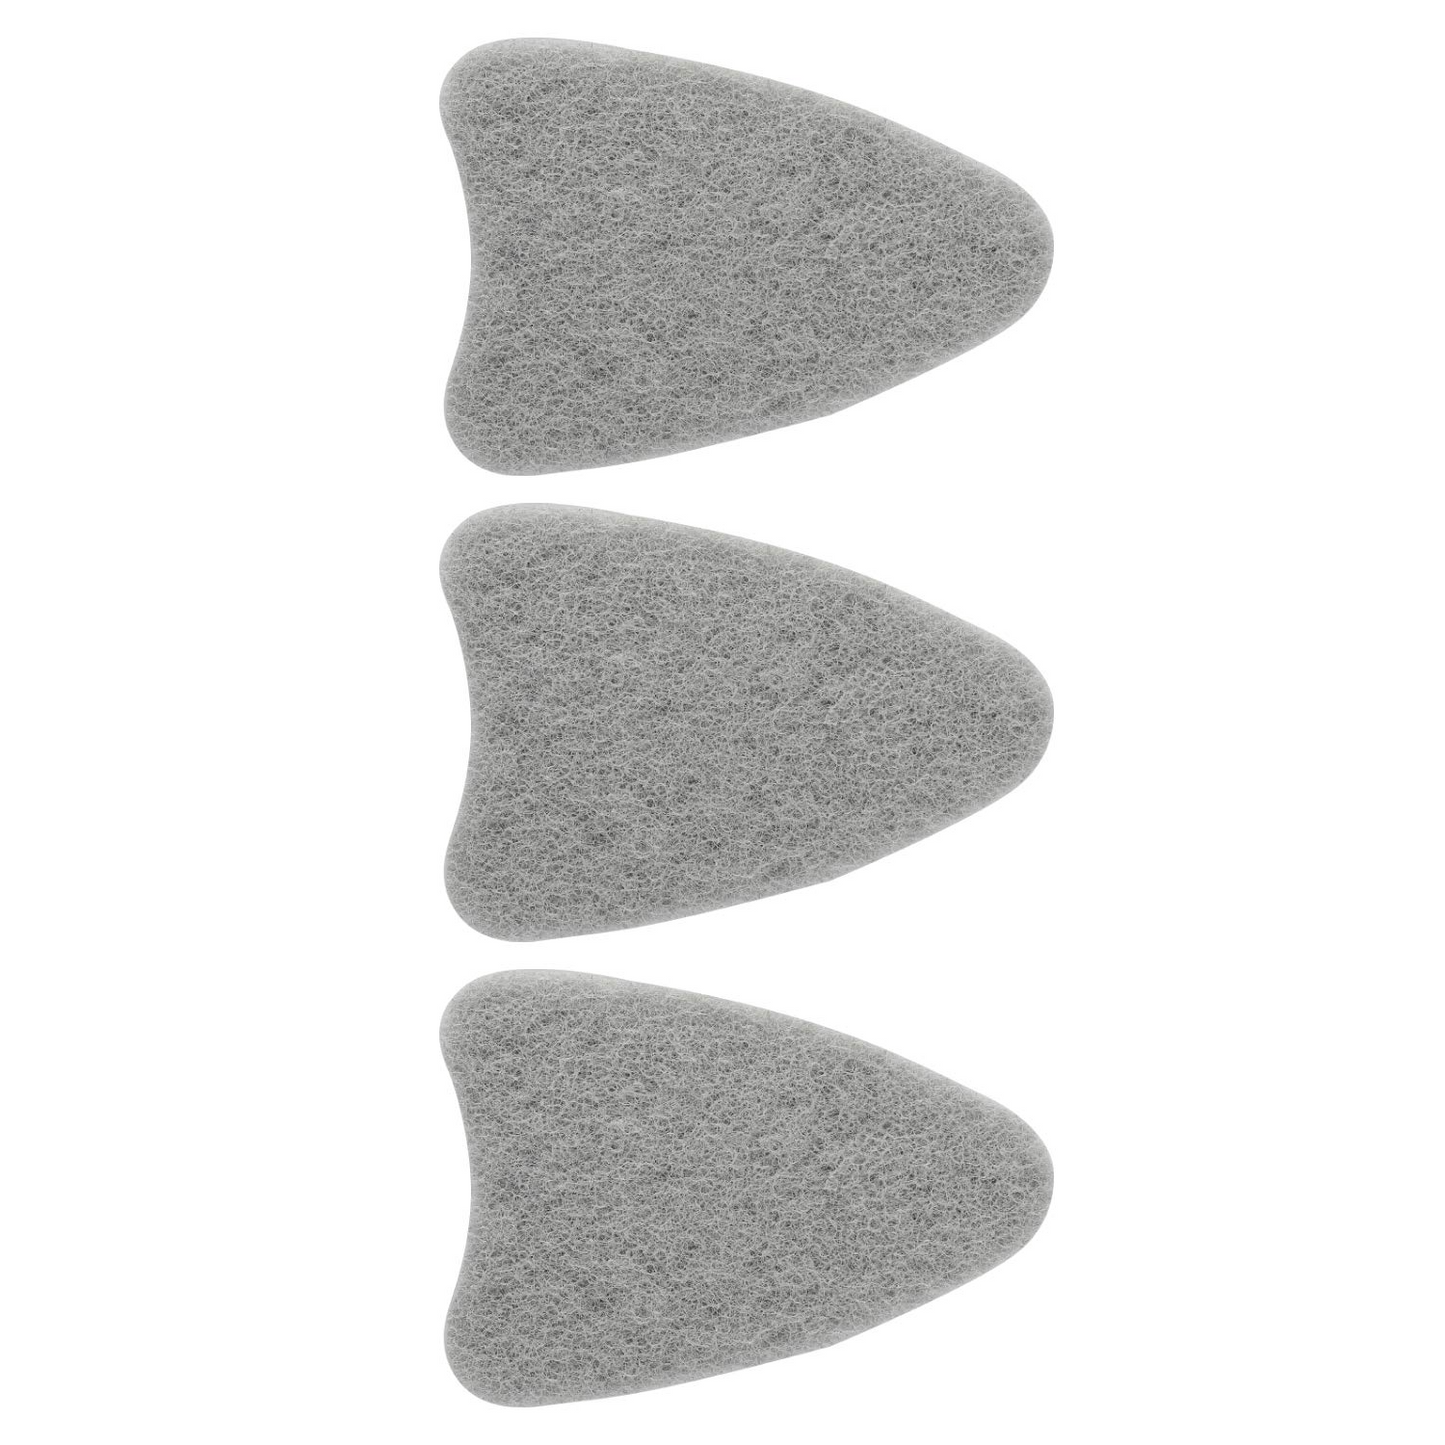 Yocada Scouring Pads Reusable for Cleaning Bathroom Kitchen Toilet Wall Tub Tile Sink 3 Pack